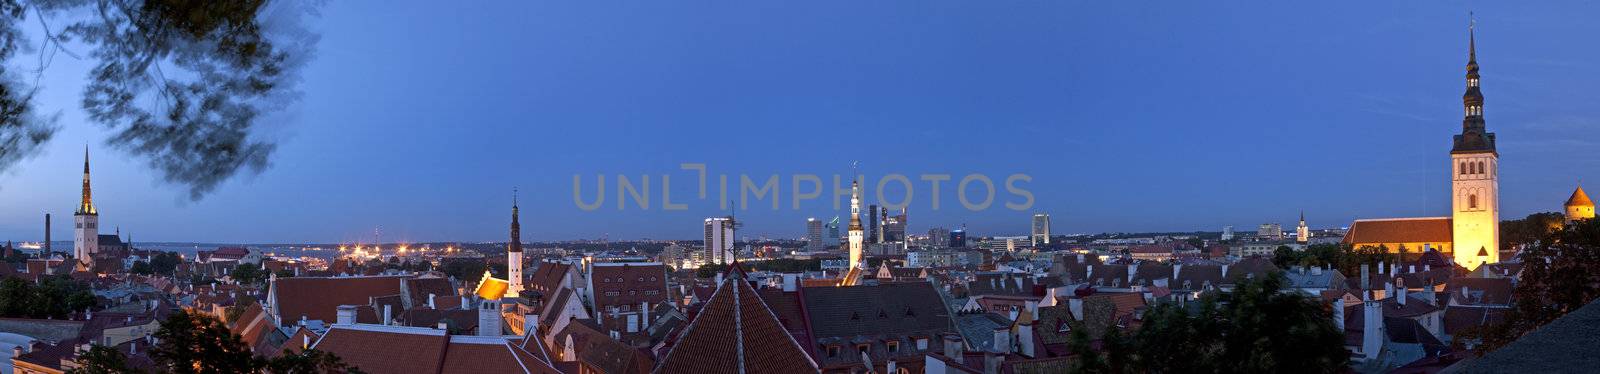 Panoramic View of Tallinn Old Town by chrisdorney